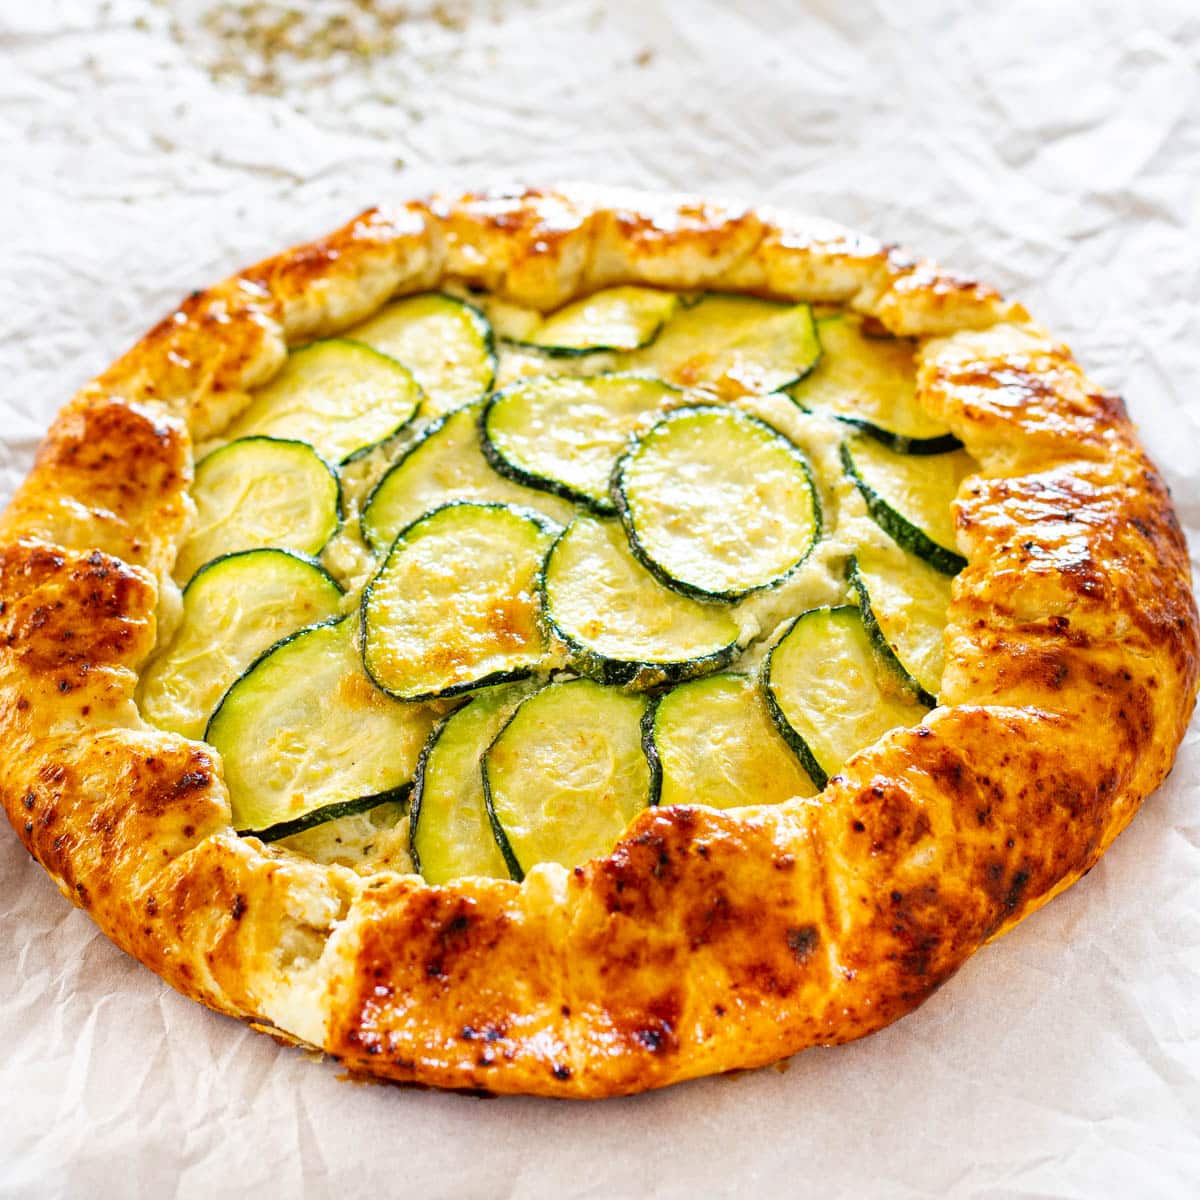 side view shot of a zucchini ricotta galette on a baking sheet lined with parchment paper fresh out of the oven